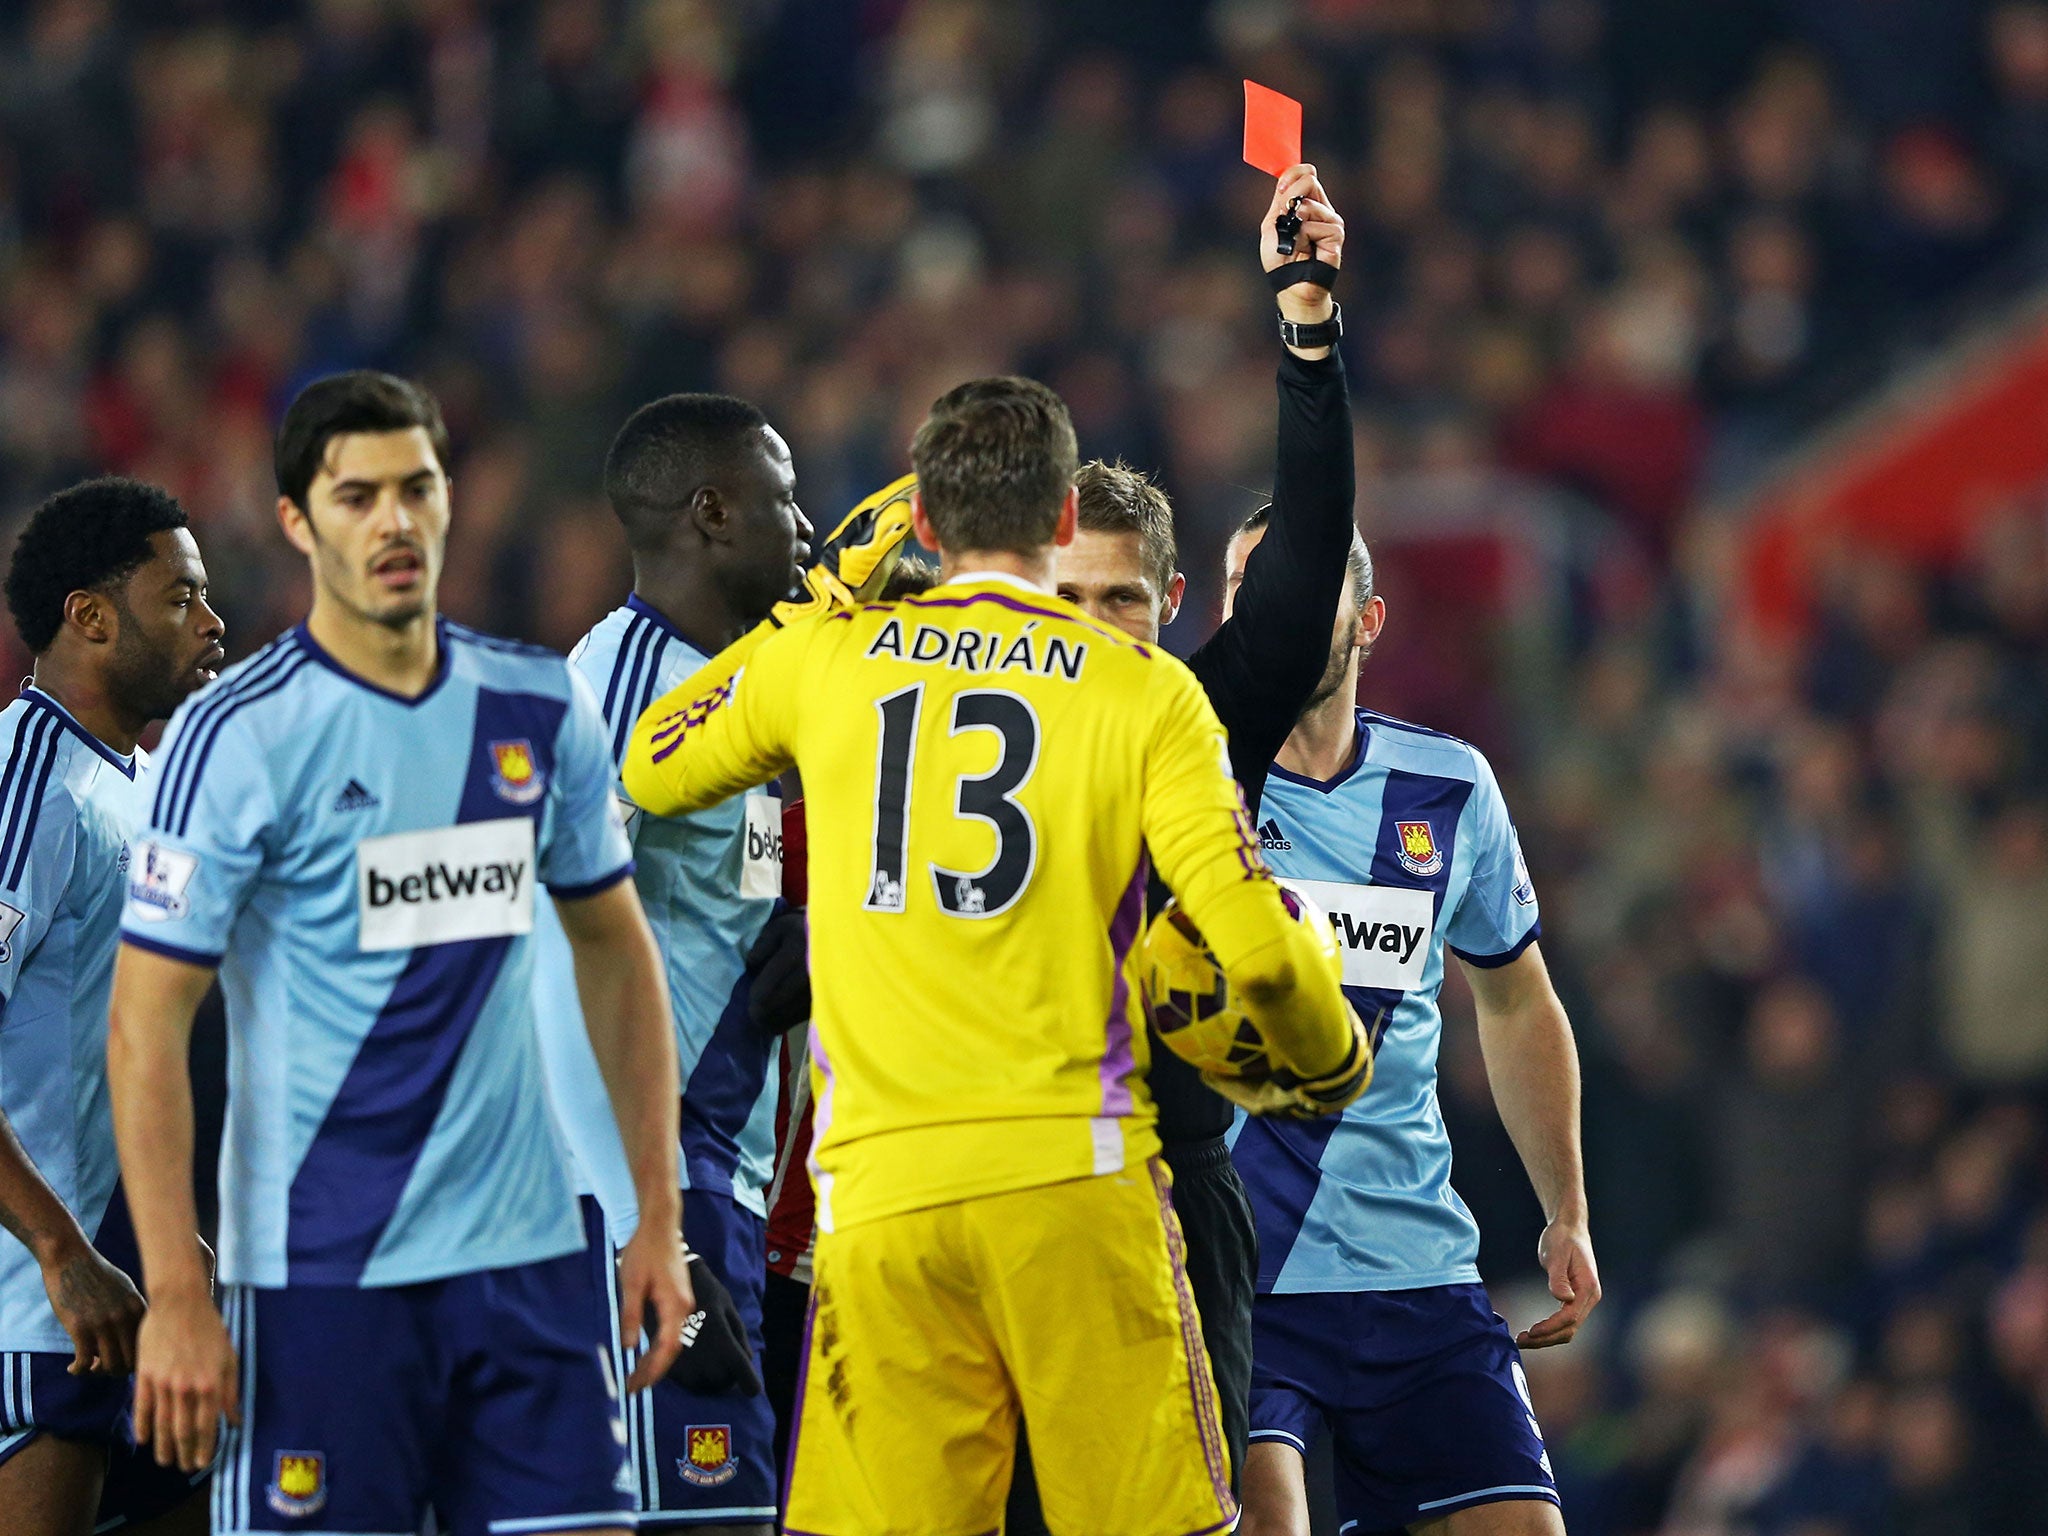 West Ham goalkeeper Adrian is sent off during the 0-0 draw with Southampton